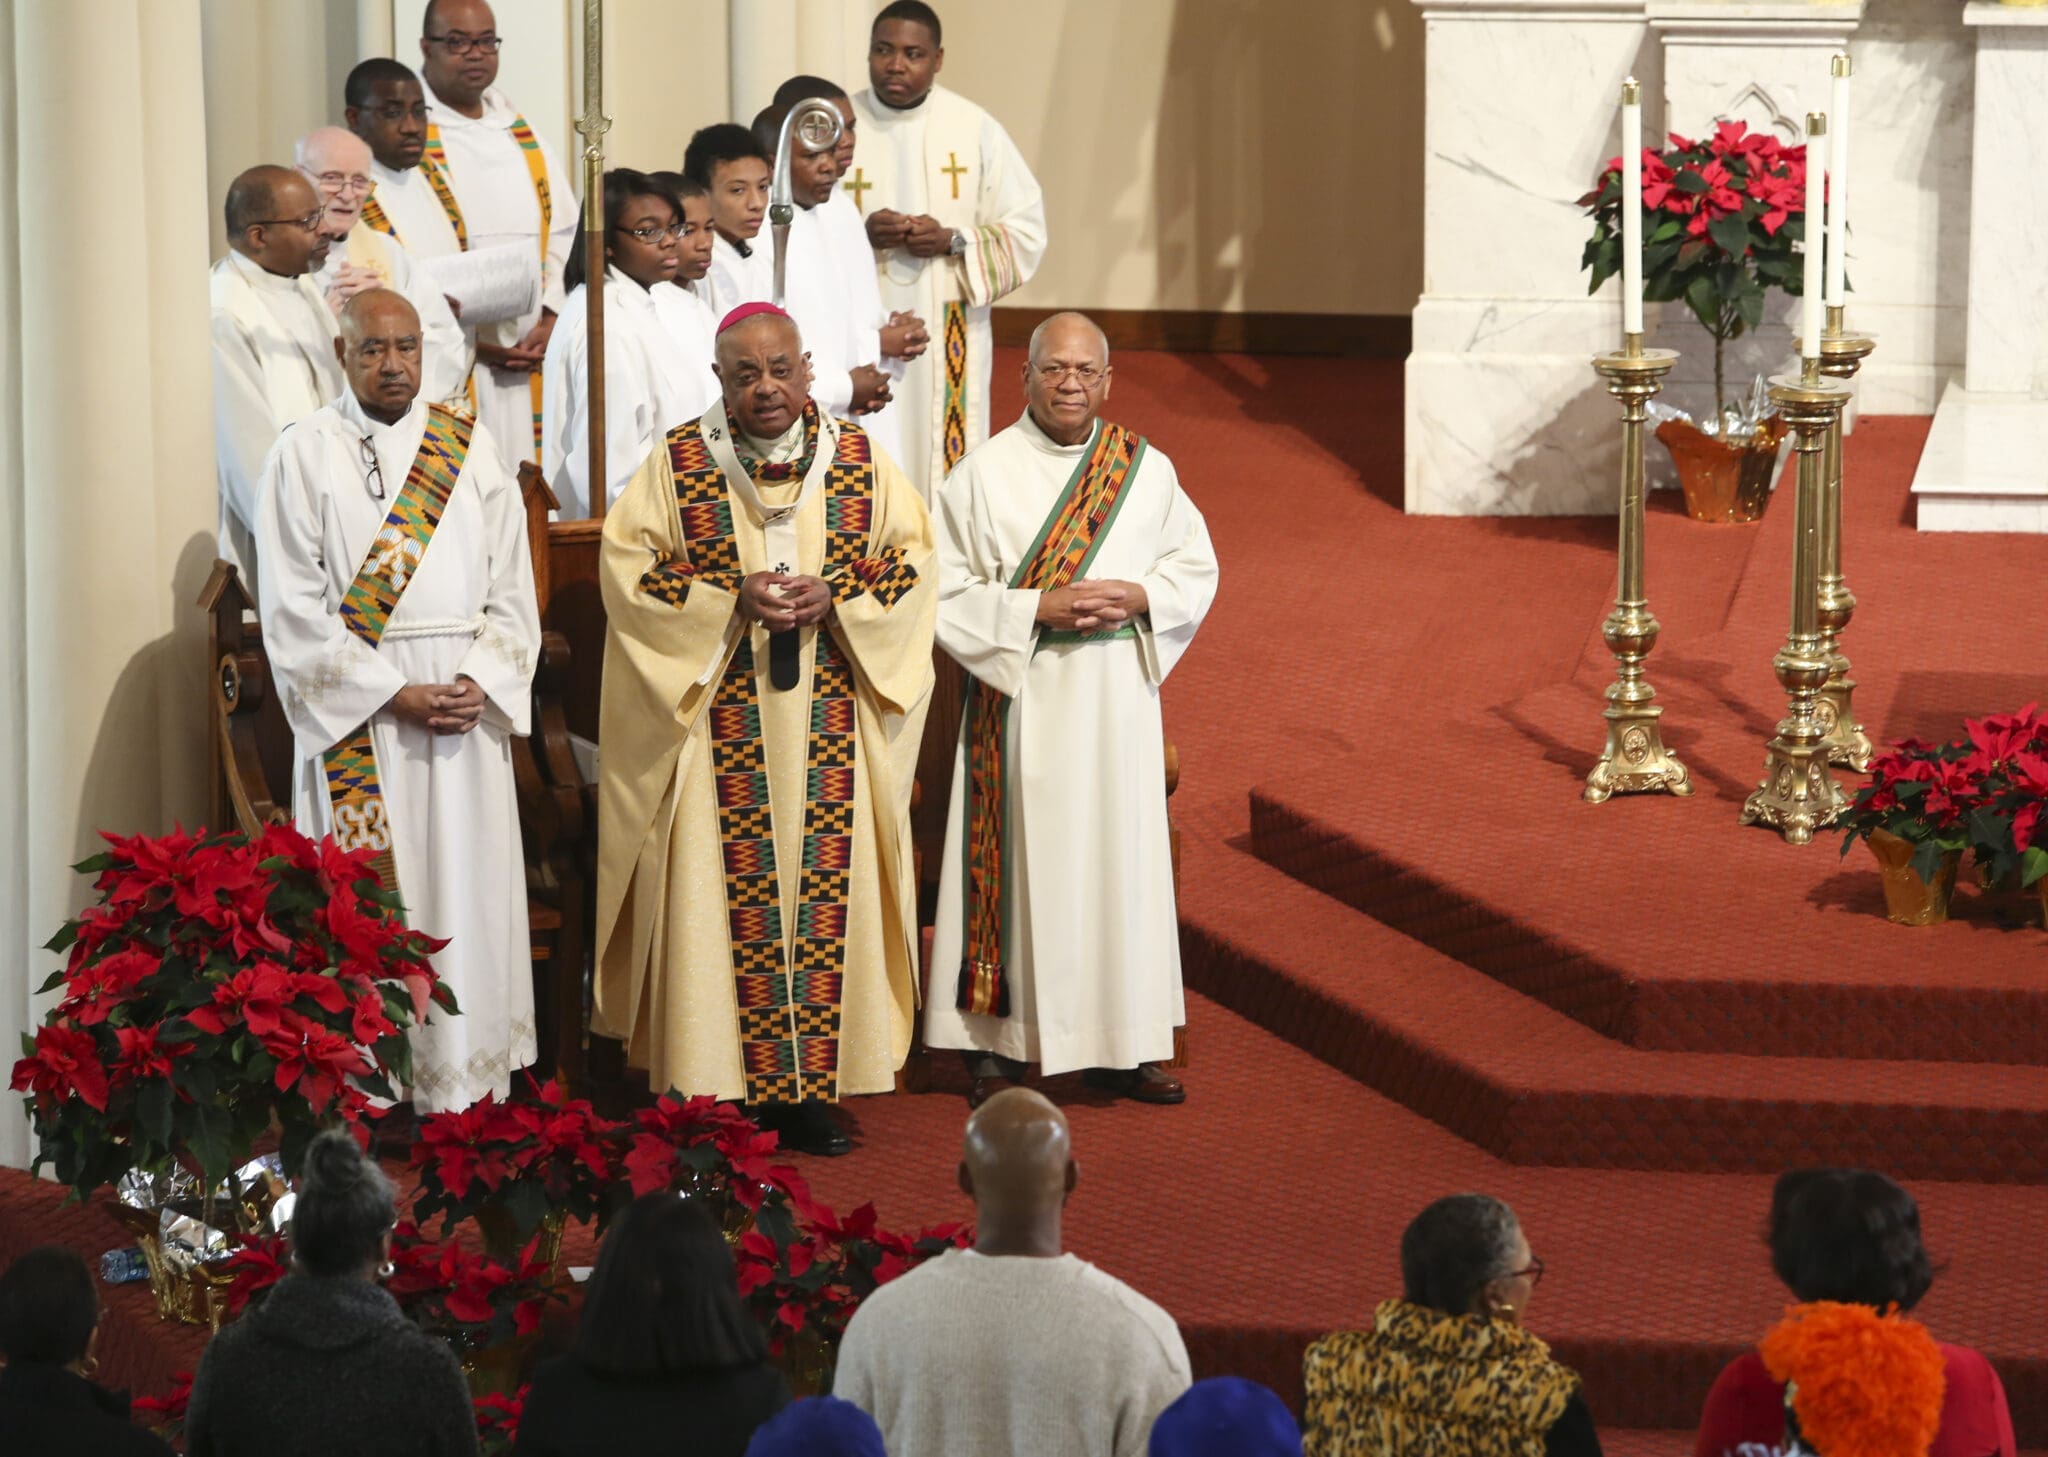 Archbishop Wilton D. Gregory, center, the principal celebrant for the Jan. 16 Martin Luther King Jr. Eucharistic Celebration at Atlanta’s Shrine of the Immaculate Conception, gives some opening remarks before the Mass commences. Standing next to the archbishop is Deacon Fred Toca, left, Deacon of the Eucharist, and Deacon Fred Sambrone, right, Deacon of the Word. Photo By Michael Alexander